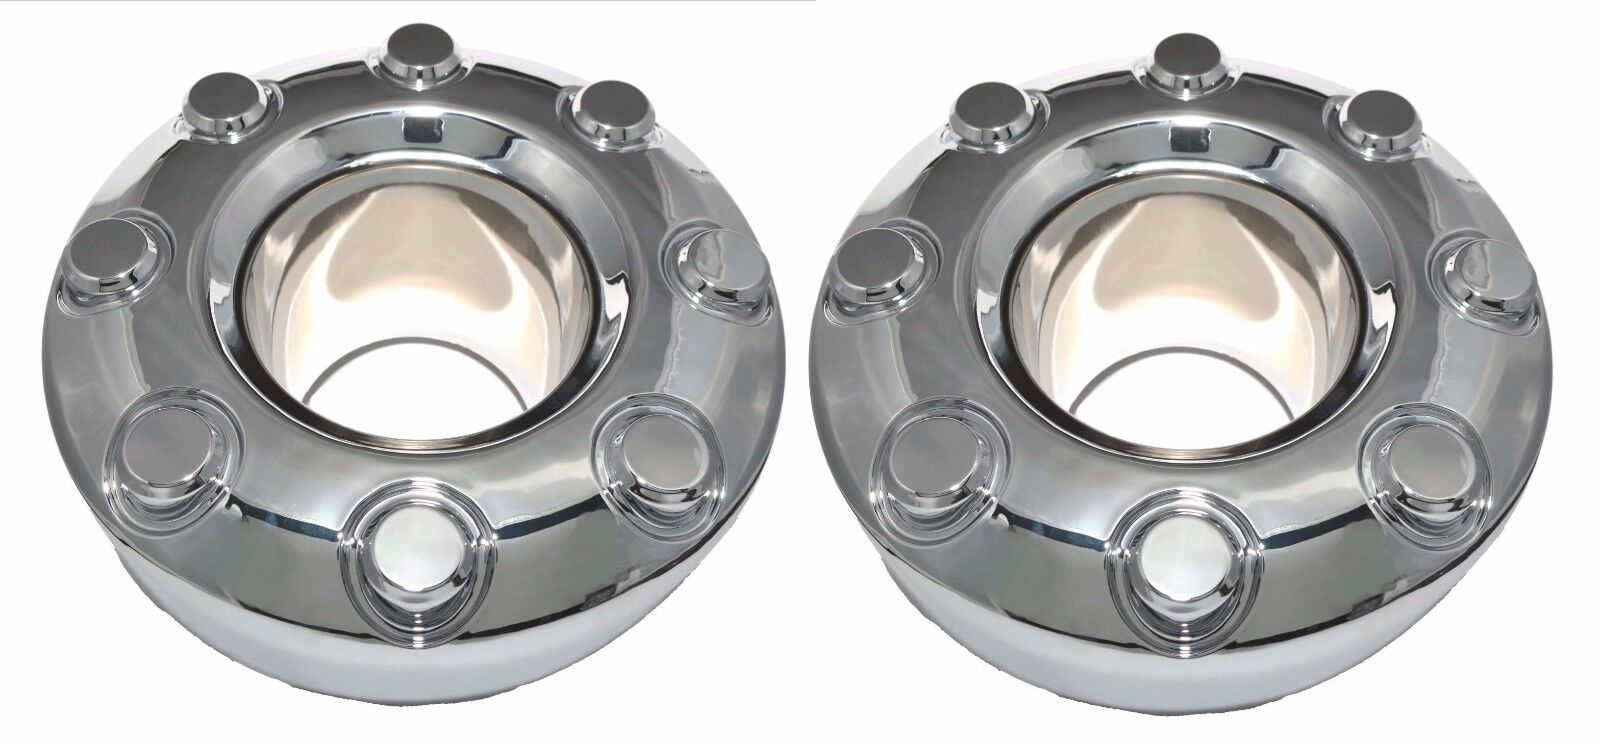 2 NEW 2005-2016 Ford F-350 F350 Dually 4x4 Front Wheel Chrome Center Caps PAIR